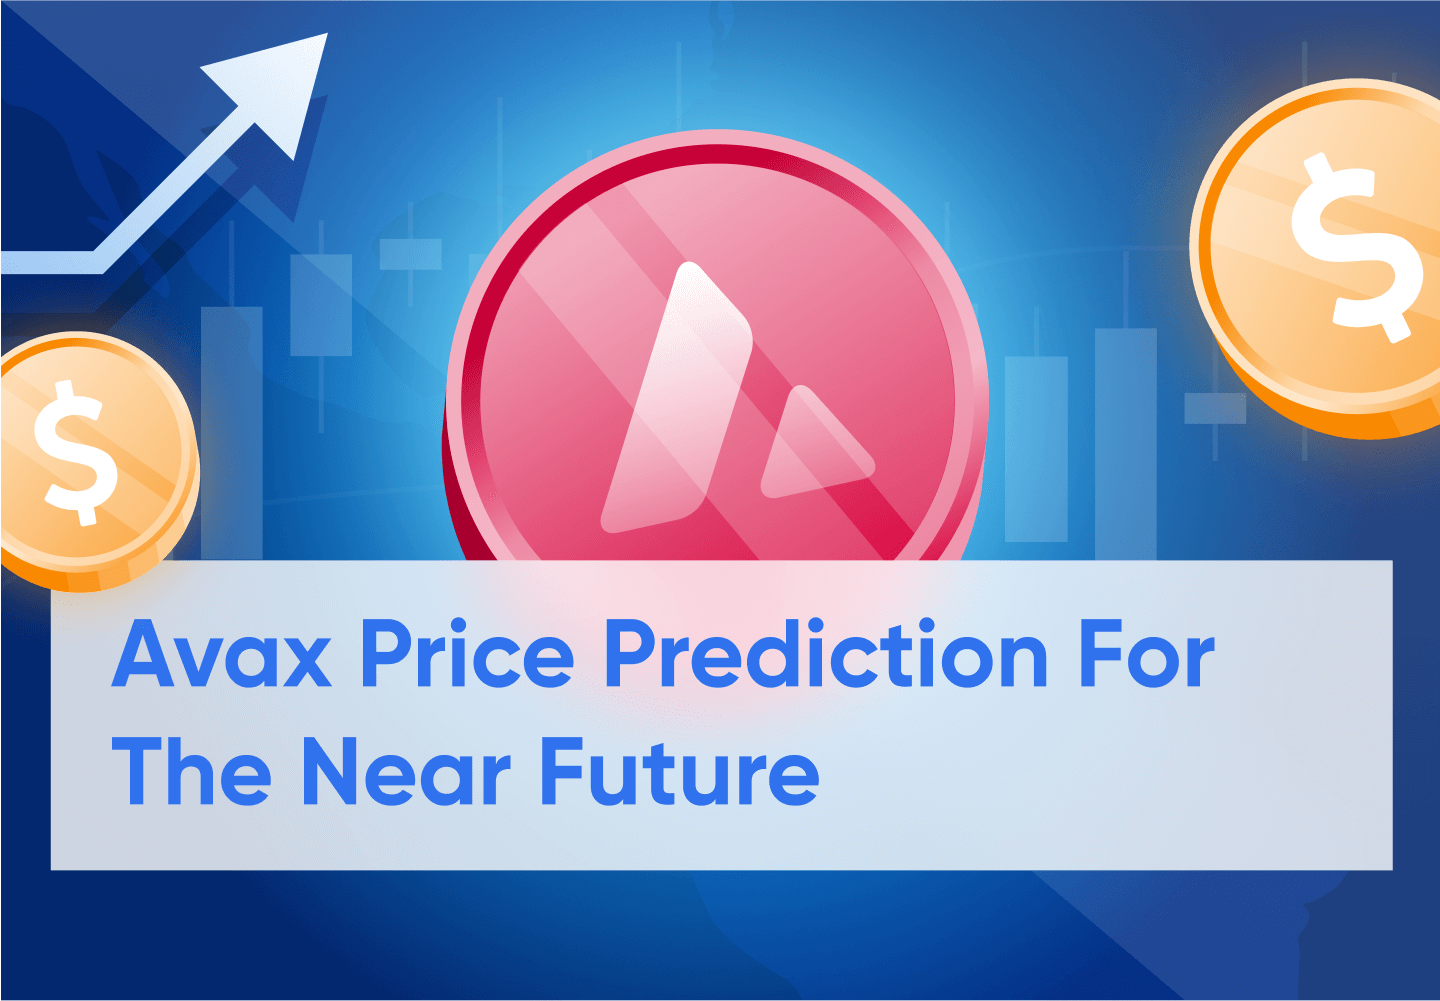 Avalanche (AVAX) Price Prediction And Forecast For The Next Decade